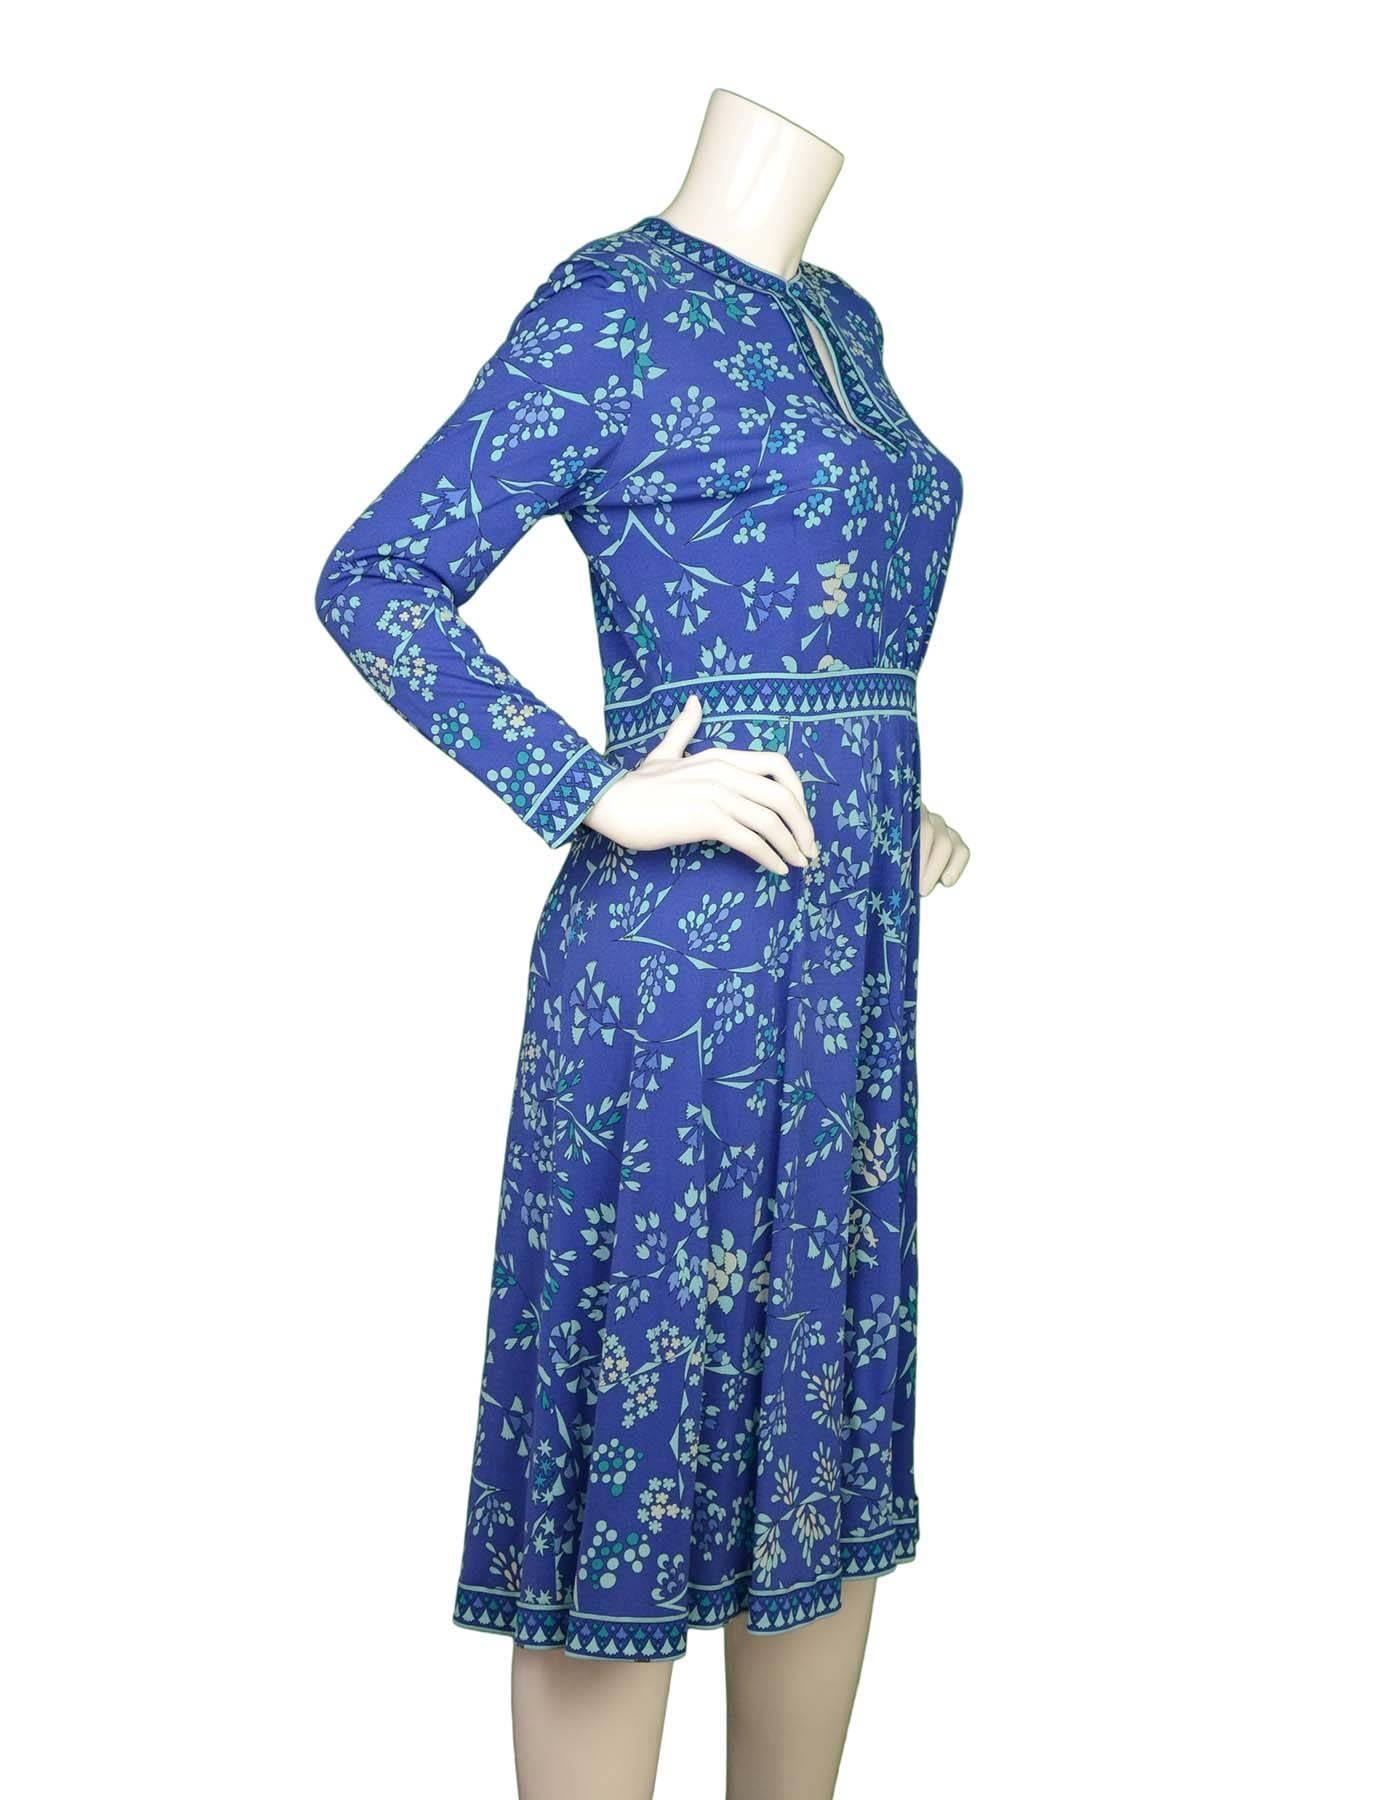 Bessi Blue Floral Print Silk Long Sleeve Dress 
Features optional key-hole neckline with top button closure

Made In: Italy
Color: Blue, teal and turquoise
Composition: 100% silk
Lining: None
Closure/Opening: Back center zipper
Exterior